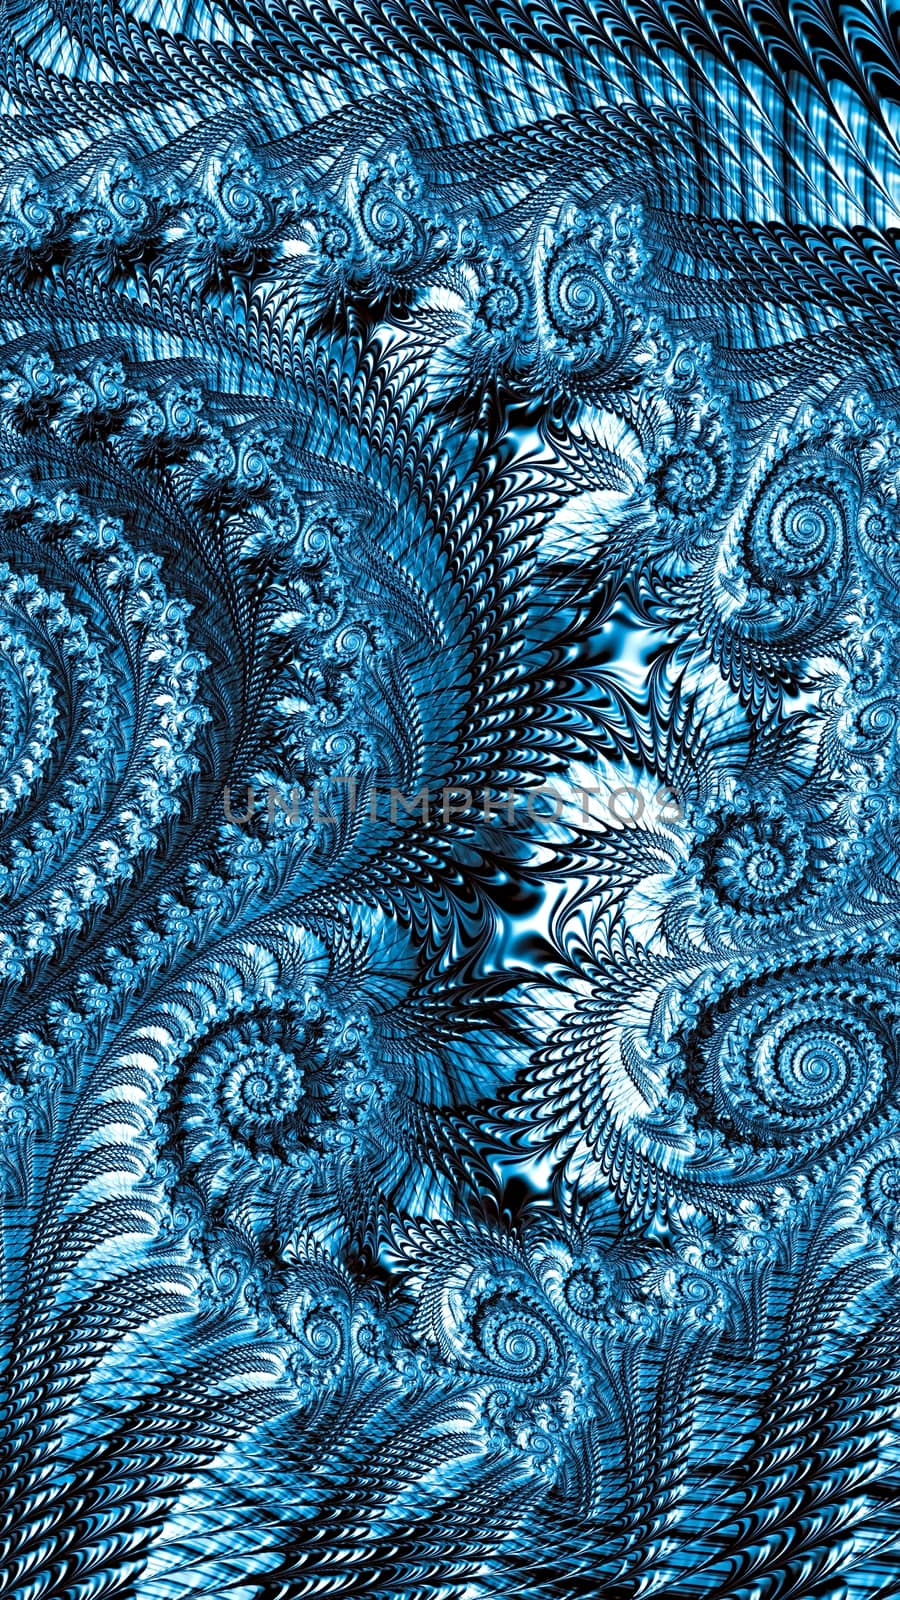 Abstract spiral ornament - computer-generated image. Fractal art: golden texture with curls and helix. Backdrop for covers, puzzles, posters.